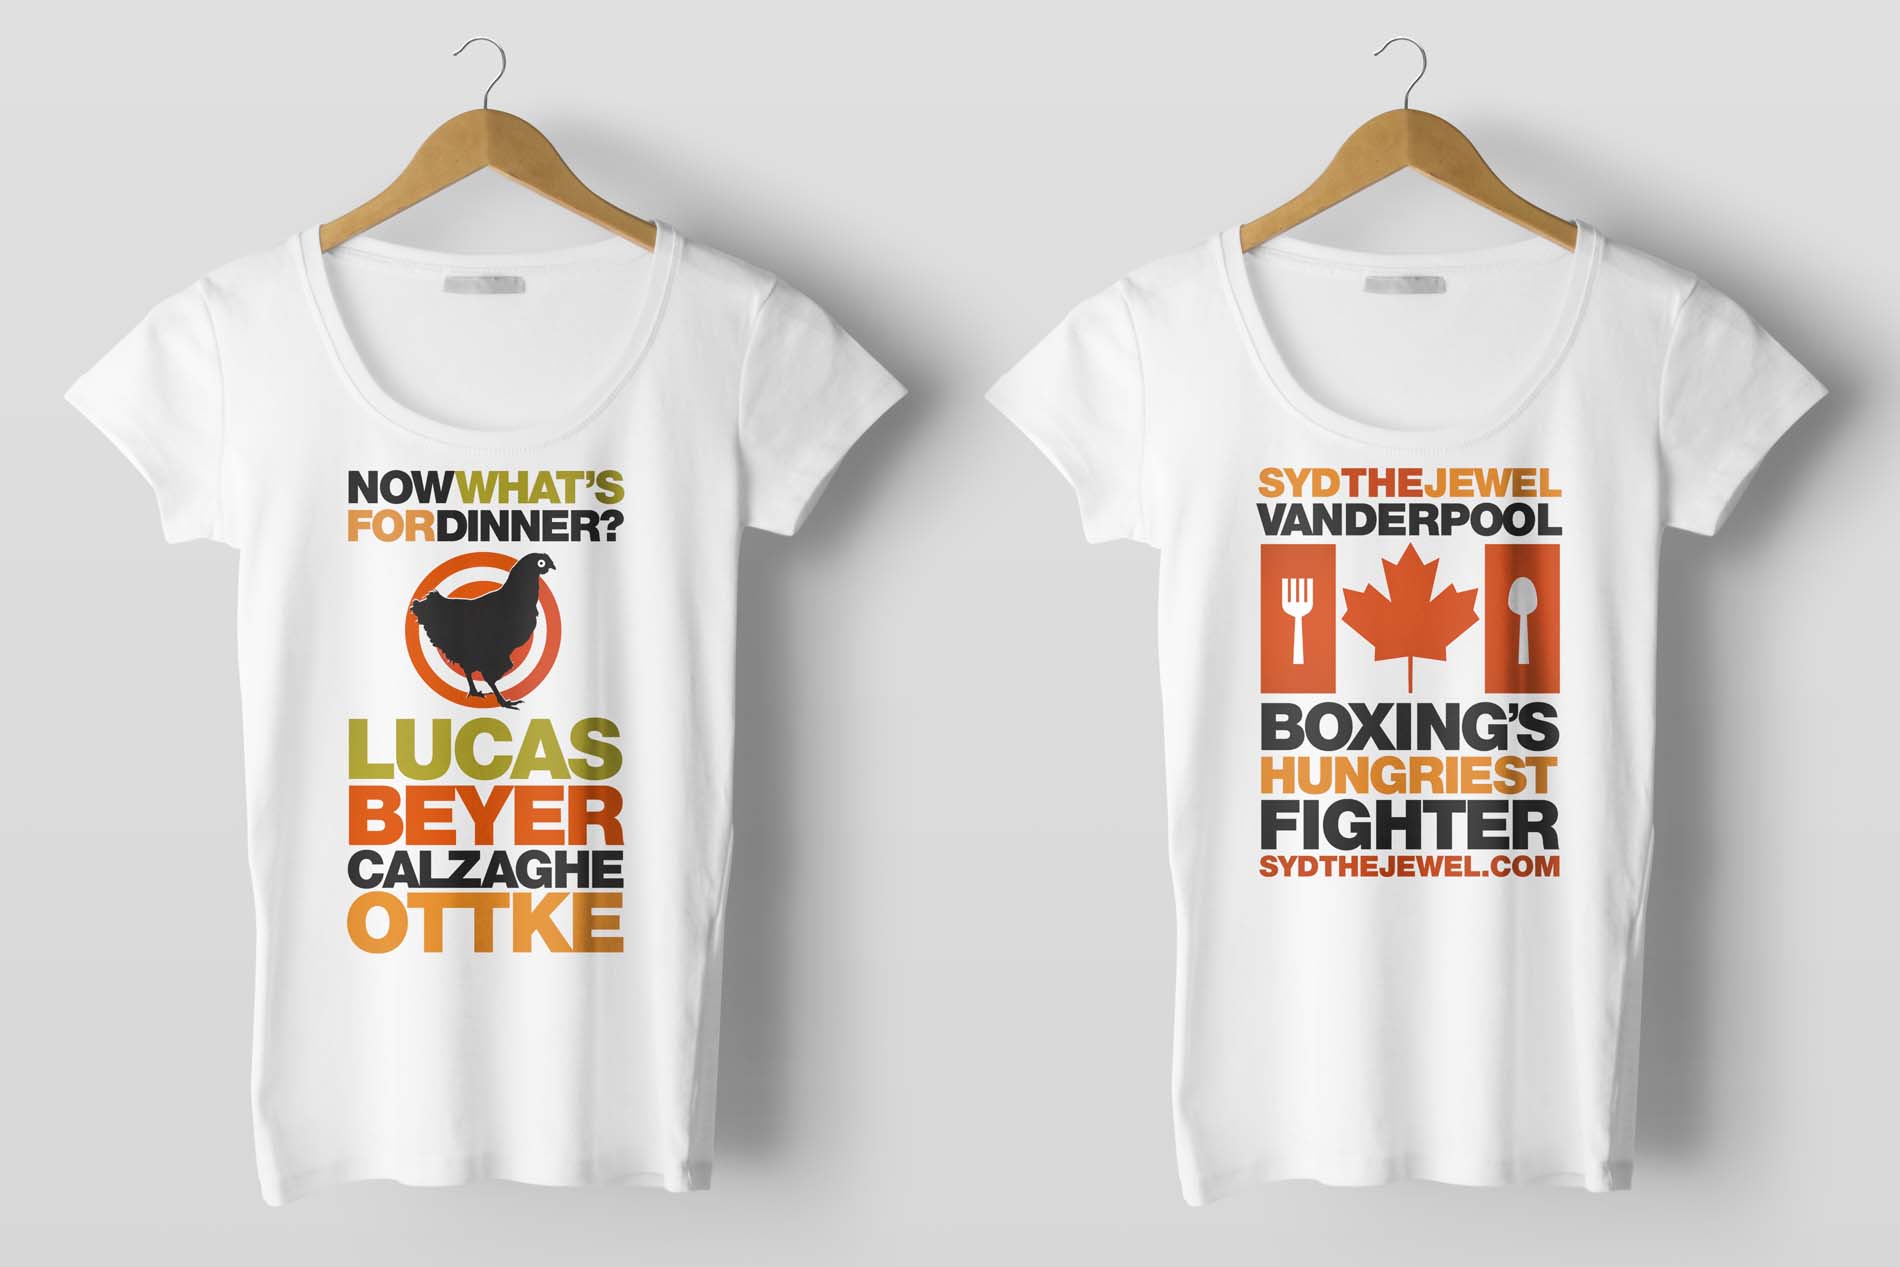 ip pm Syd Vanderpool boxing T shirt mockup by design direction llc clark most